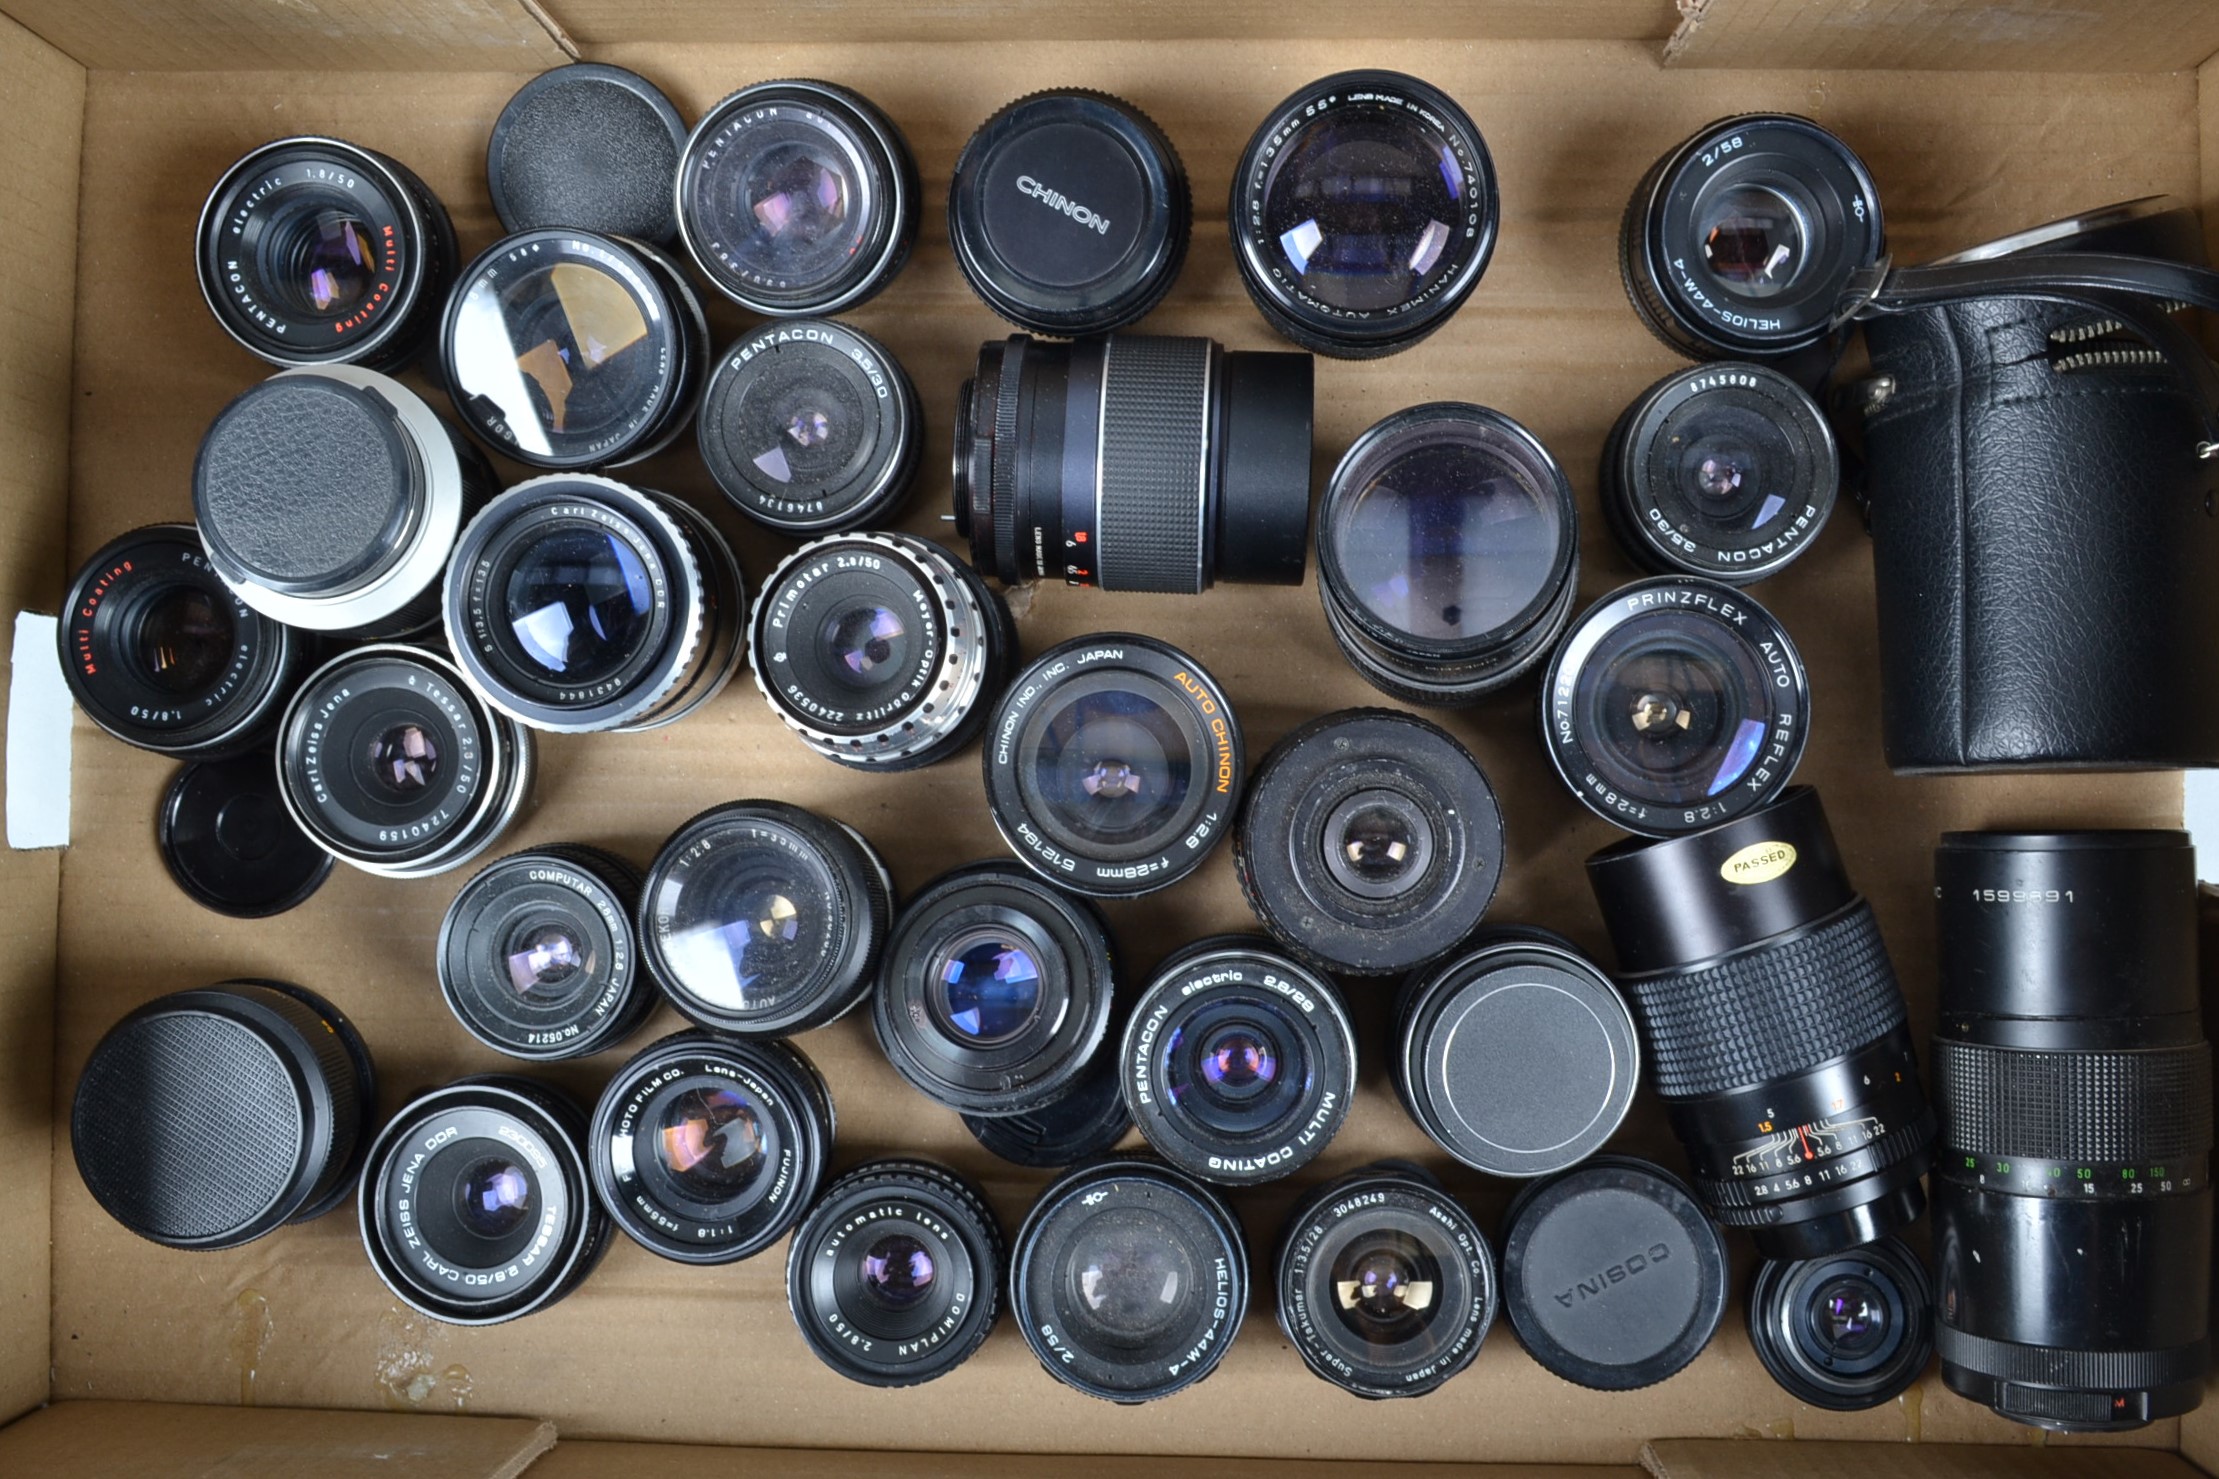 A Tray of M42 Mount Prime Lenses, various focal lengths, manufacturers include Pentagon, Carl